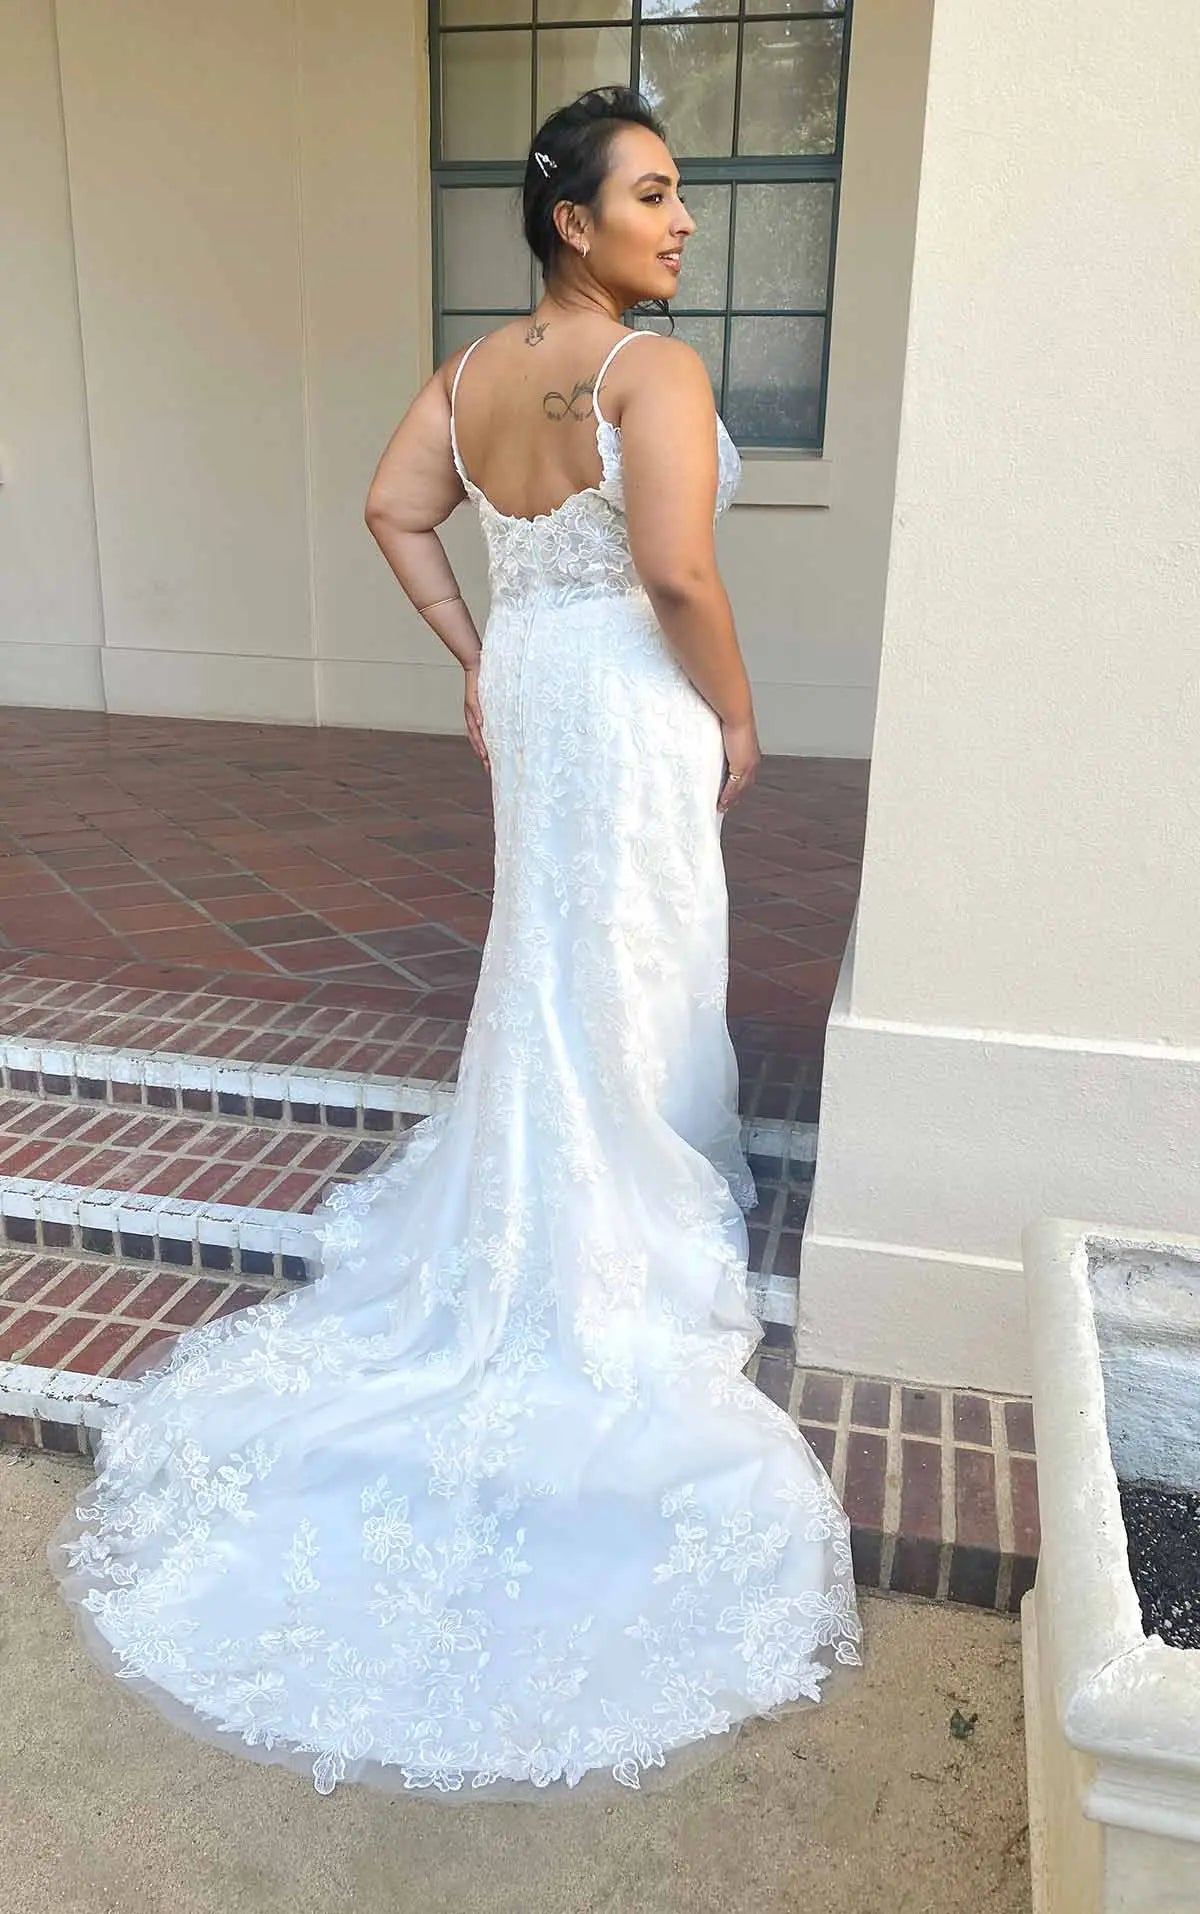 Elegant Gorgeous Mermaid Wedding Dresses With Detachable Overskirt,  Stunning Lace Applique, And Long Sleeves Perfect For Glamorous Queen Bridal  Gowns From Xzy1984316, $201.01 | DHgate.Com